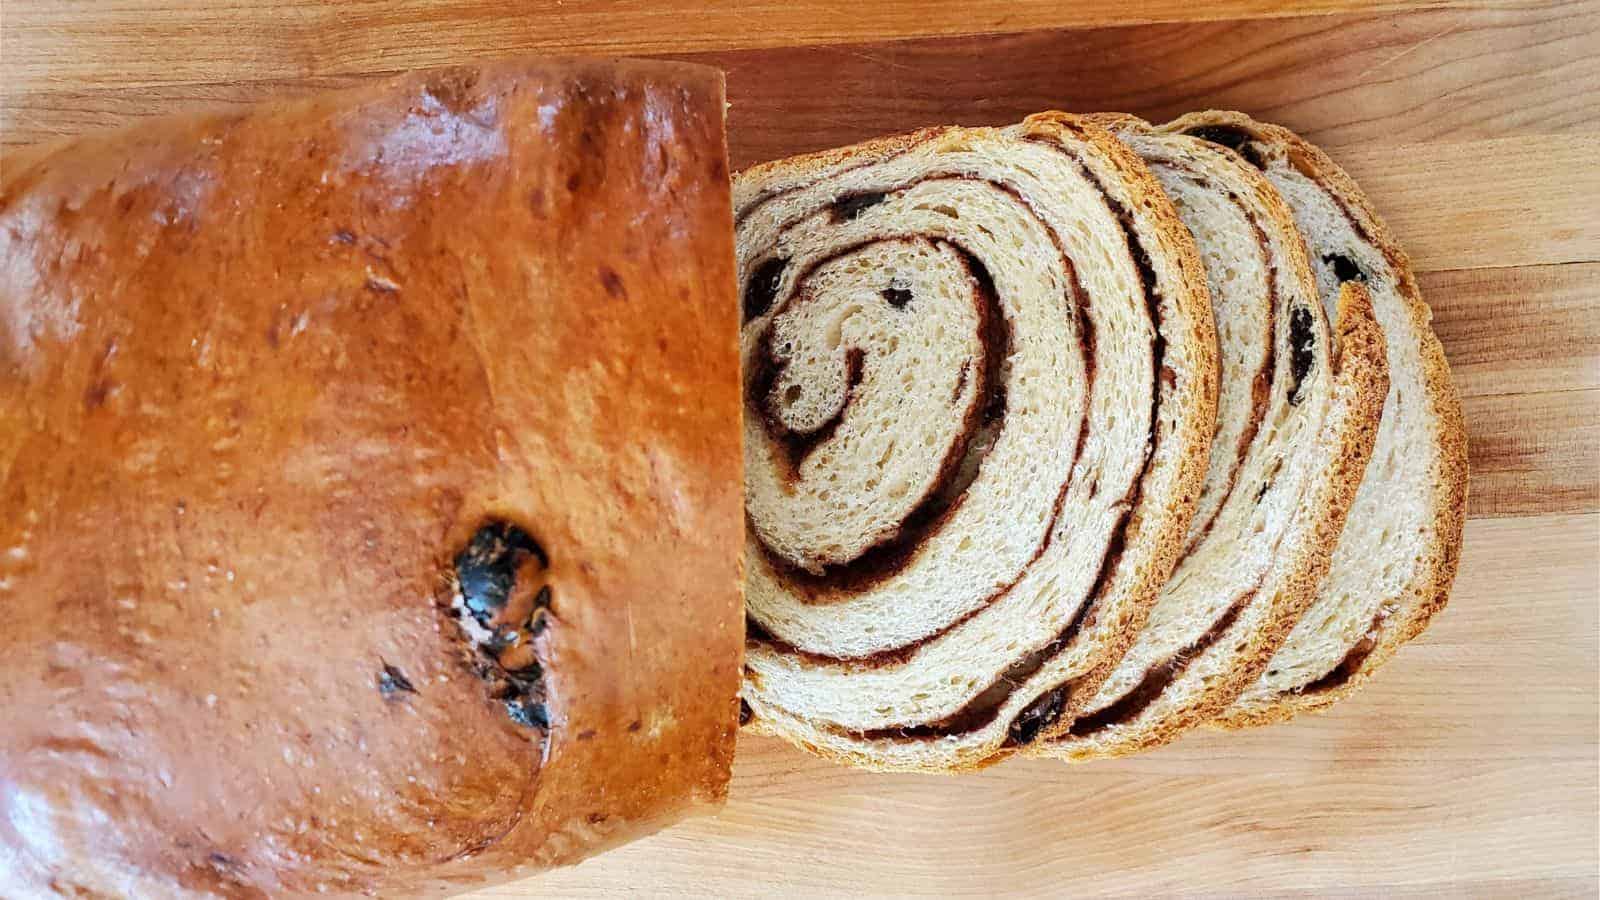 Image shows an overhead view of Cinnamon Raisin Bread with part of the loaf sliced.